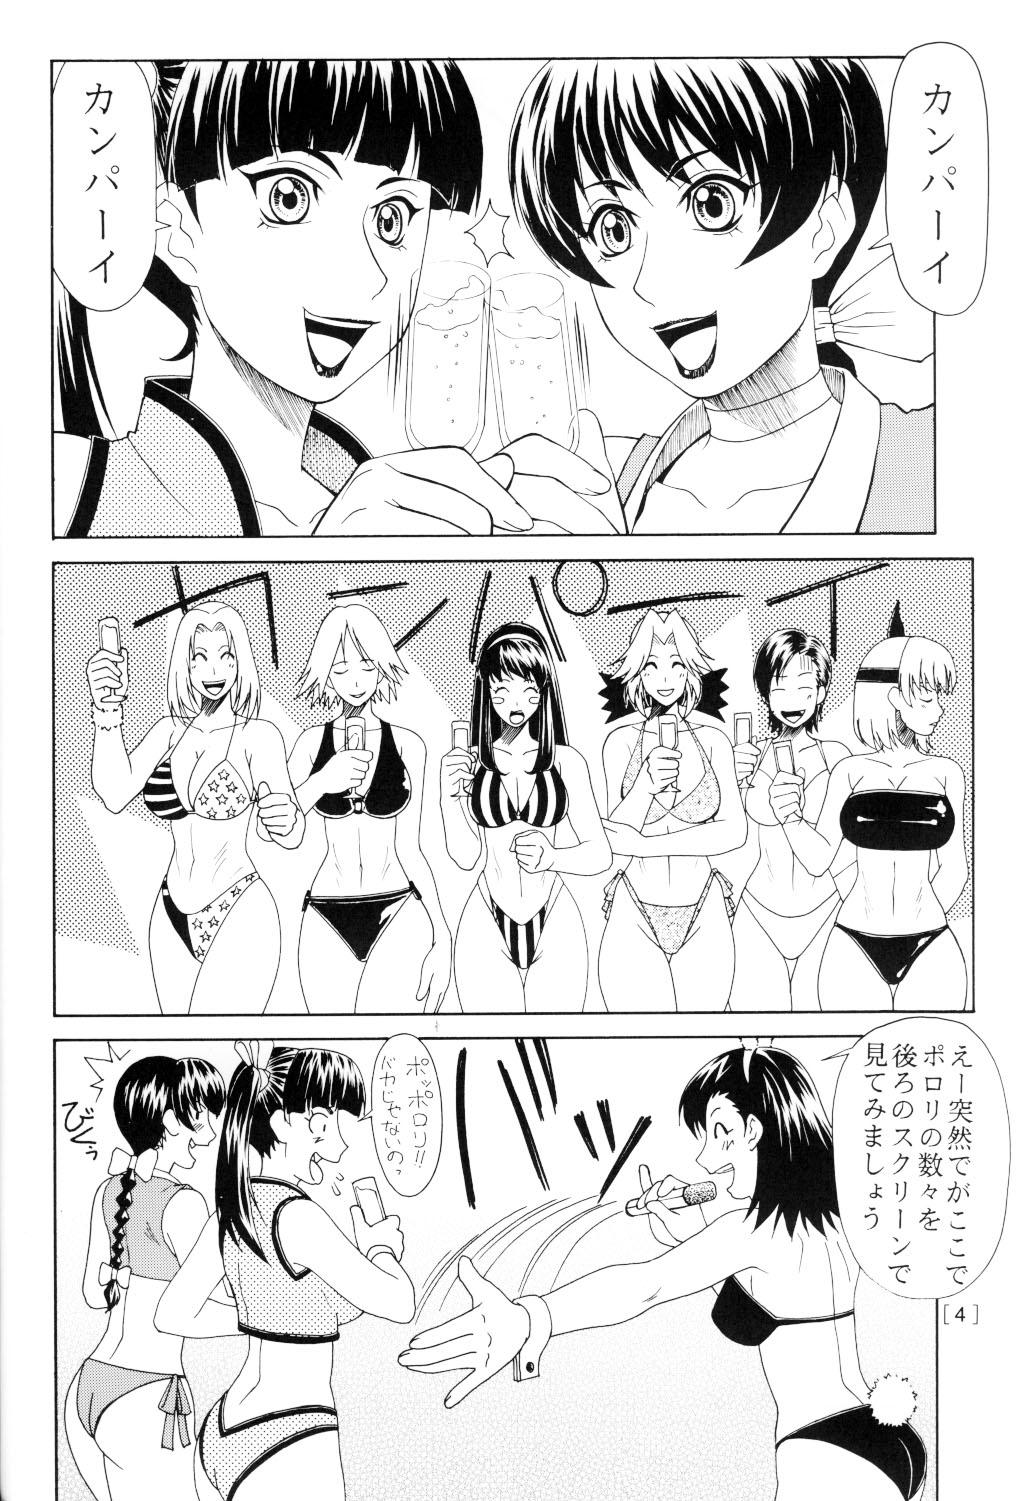 Reversecowgirl Mikicy Vol. 2 - Dead or alive Ace attorney Polish - Page 5